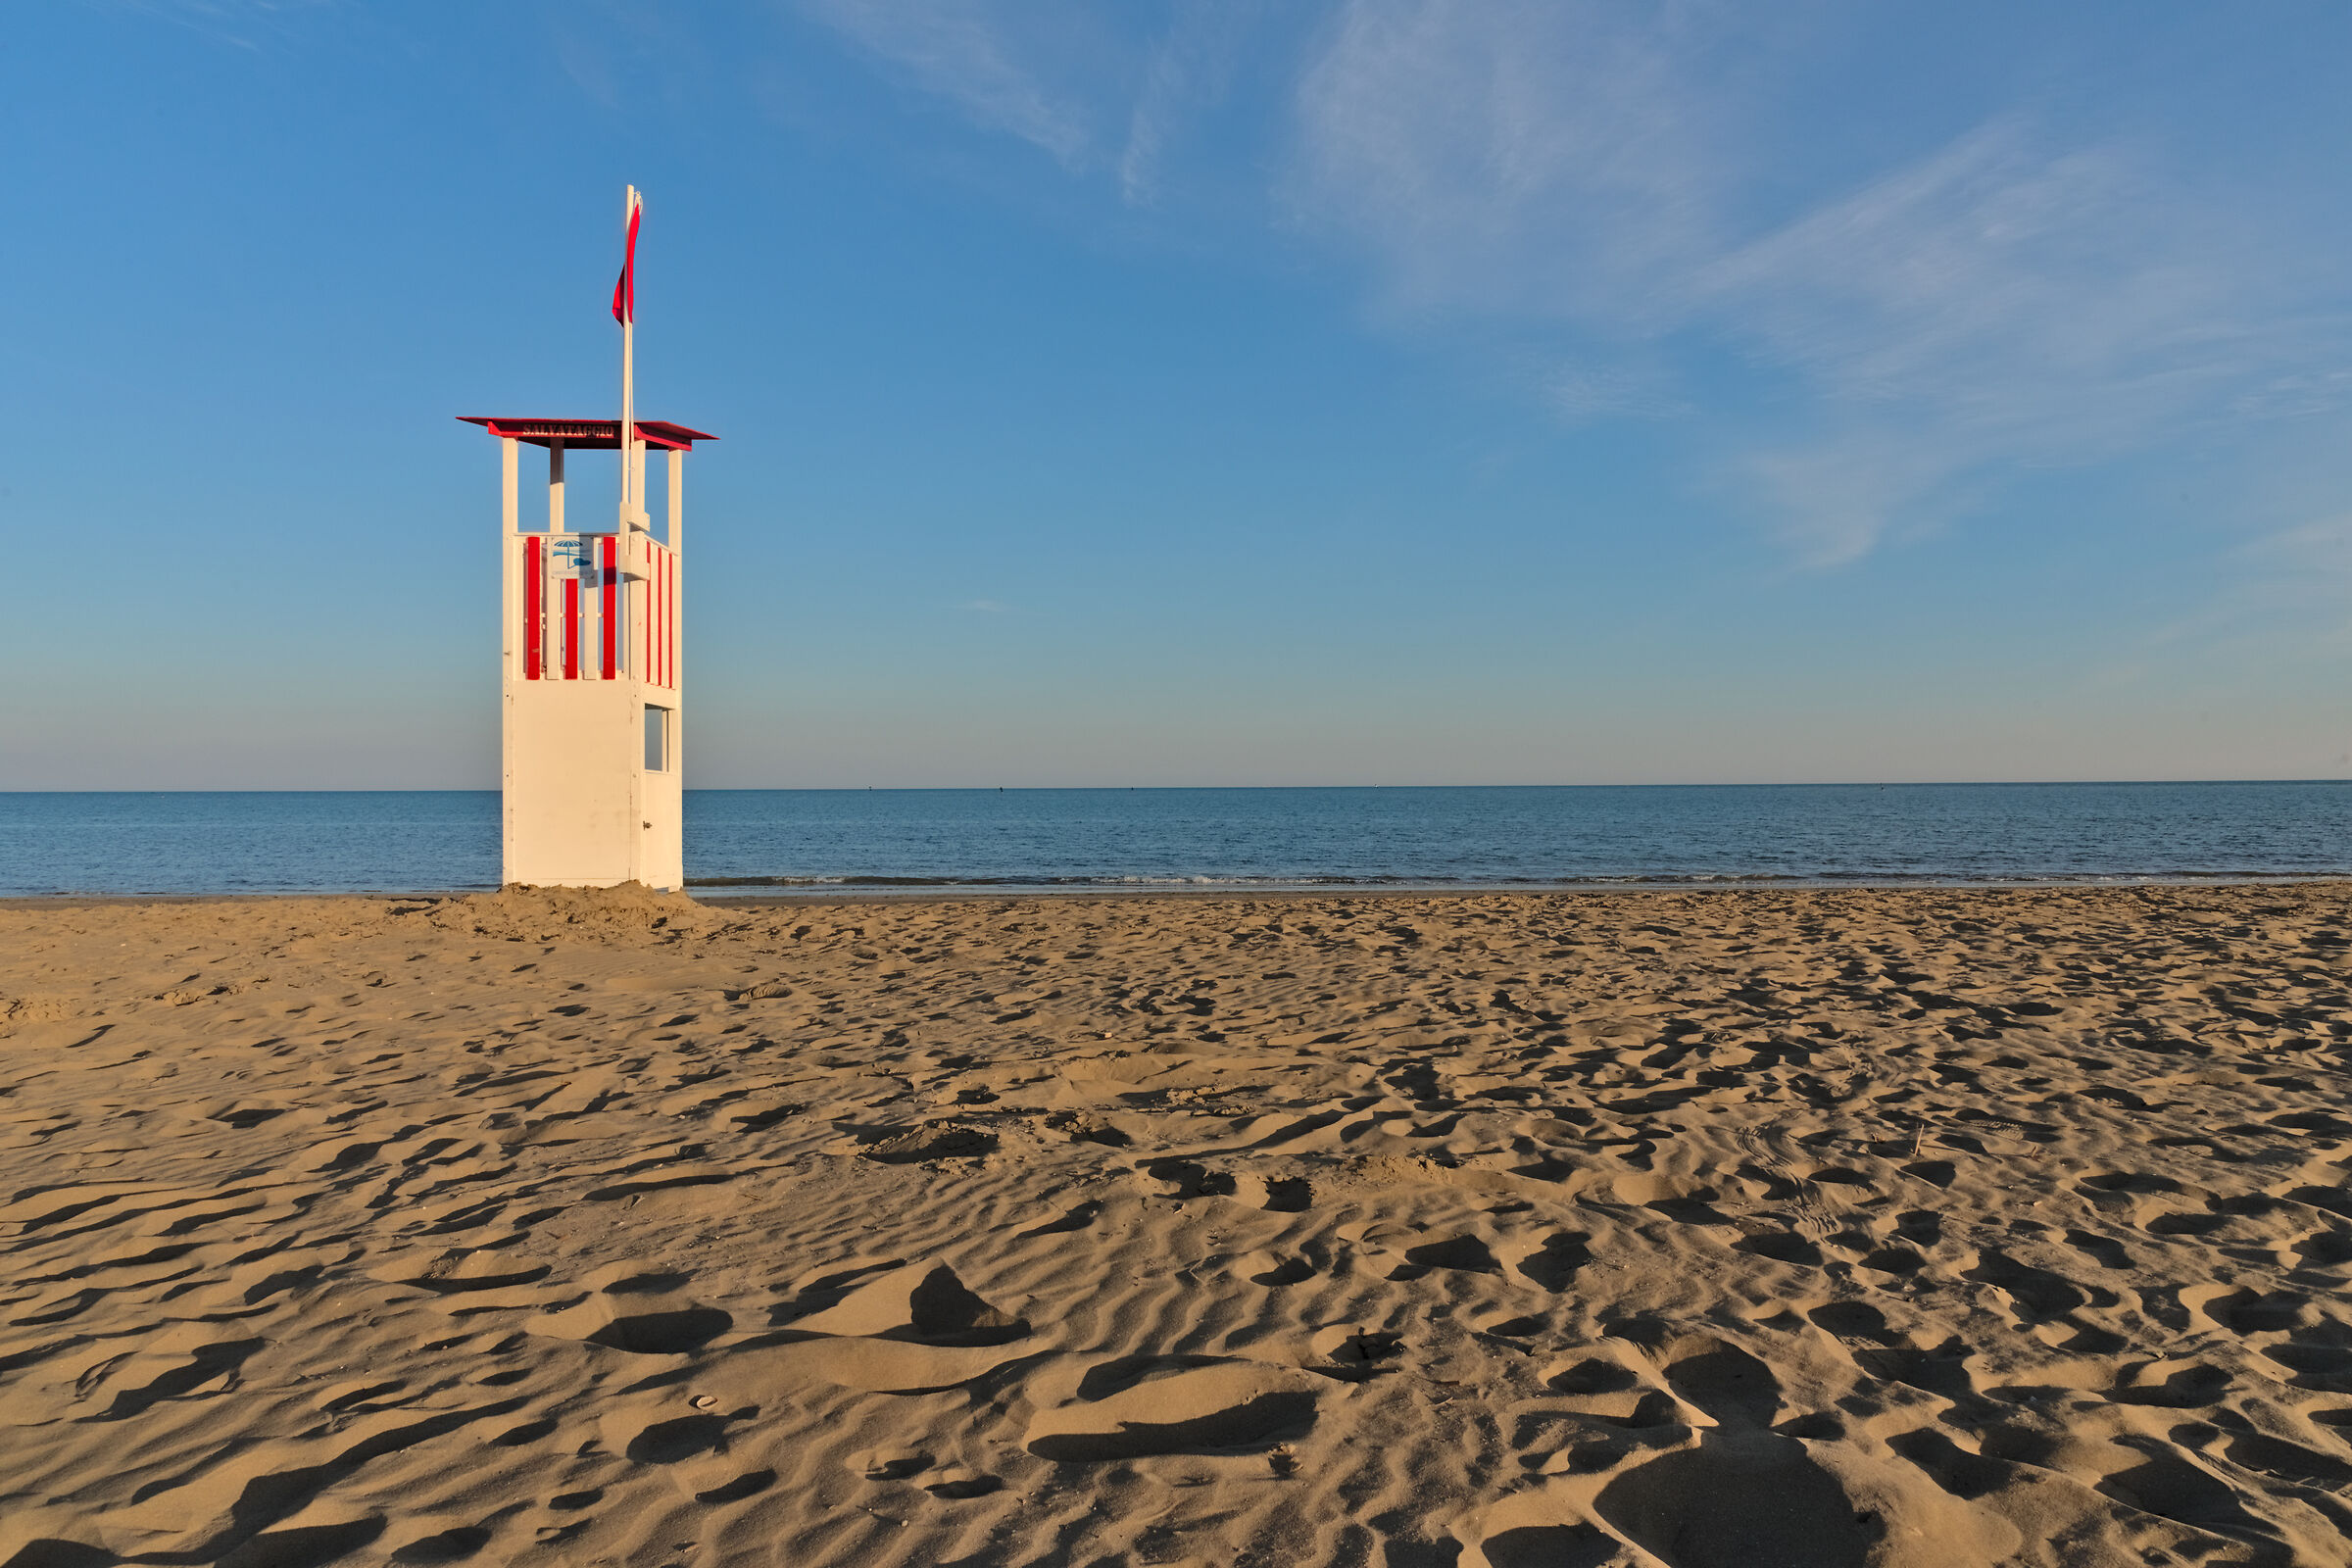 Rescue tower - Caorle...